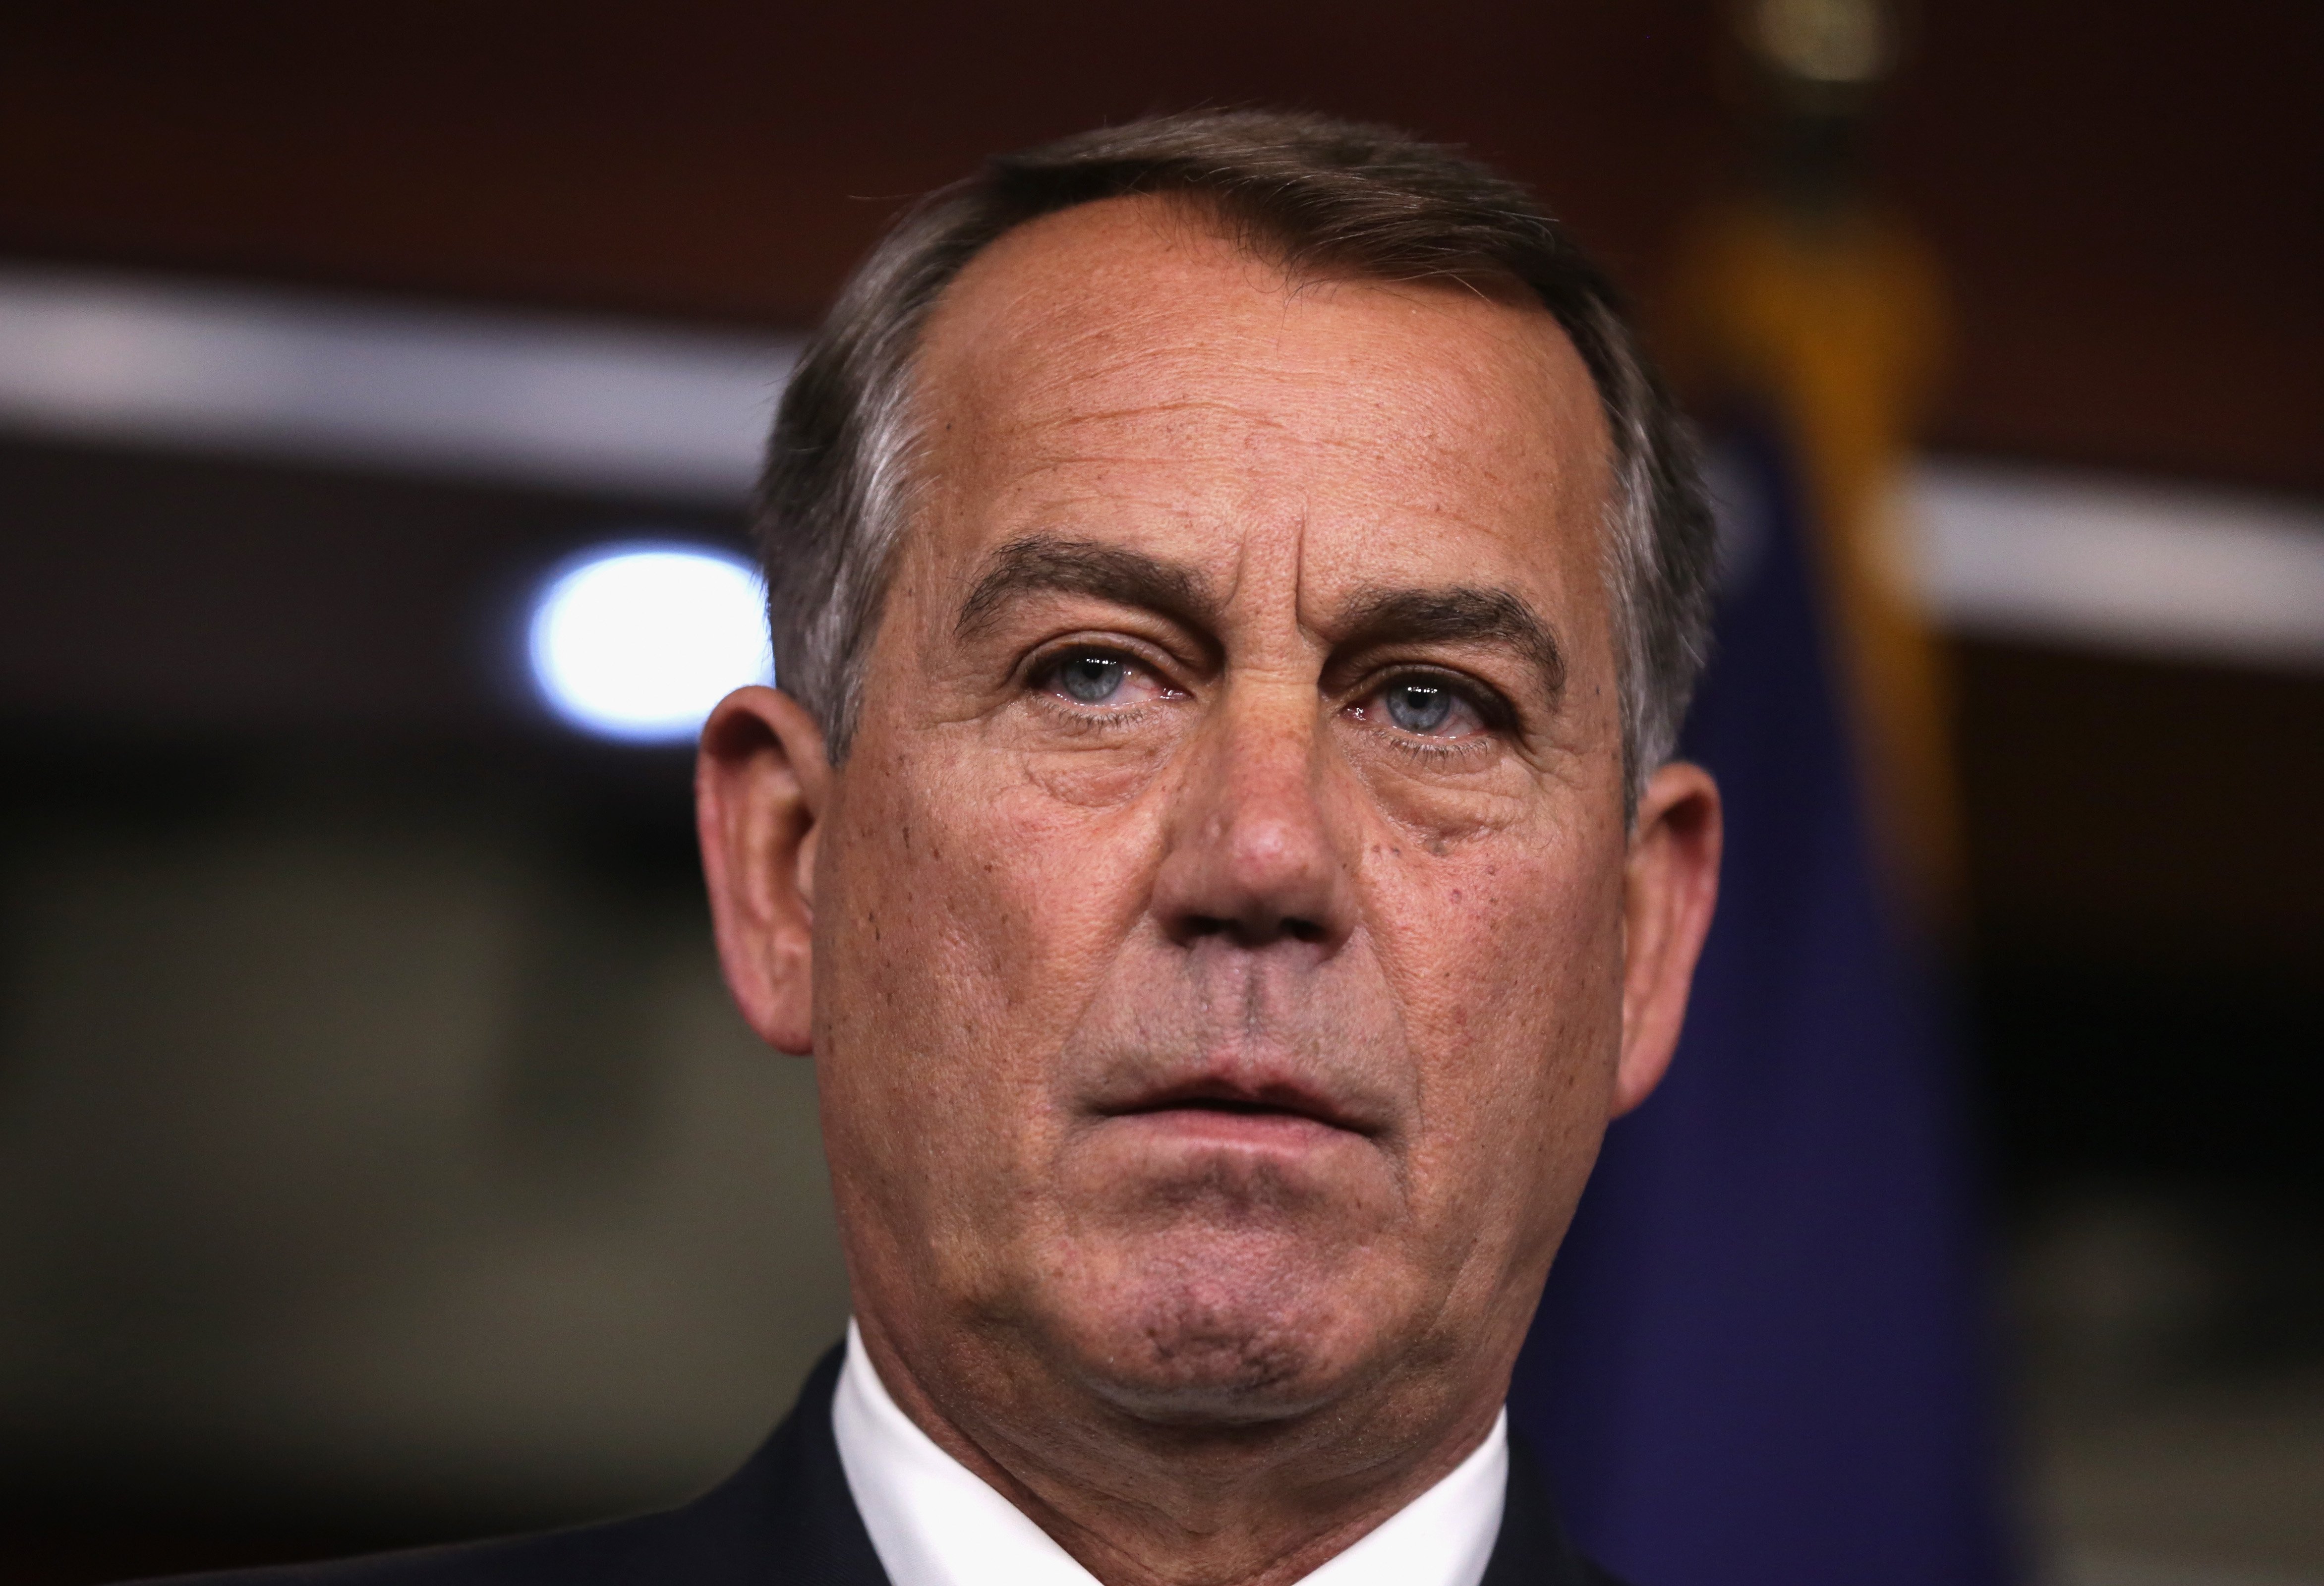 U.S. Speaker of the House Rep. John Boehner speaks during a news conference on June 12, 2014 in Washington. (Alex Wong—Getty Images)